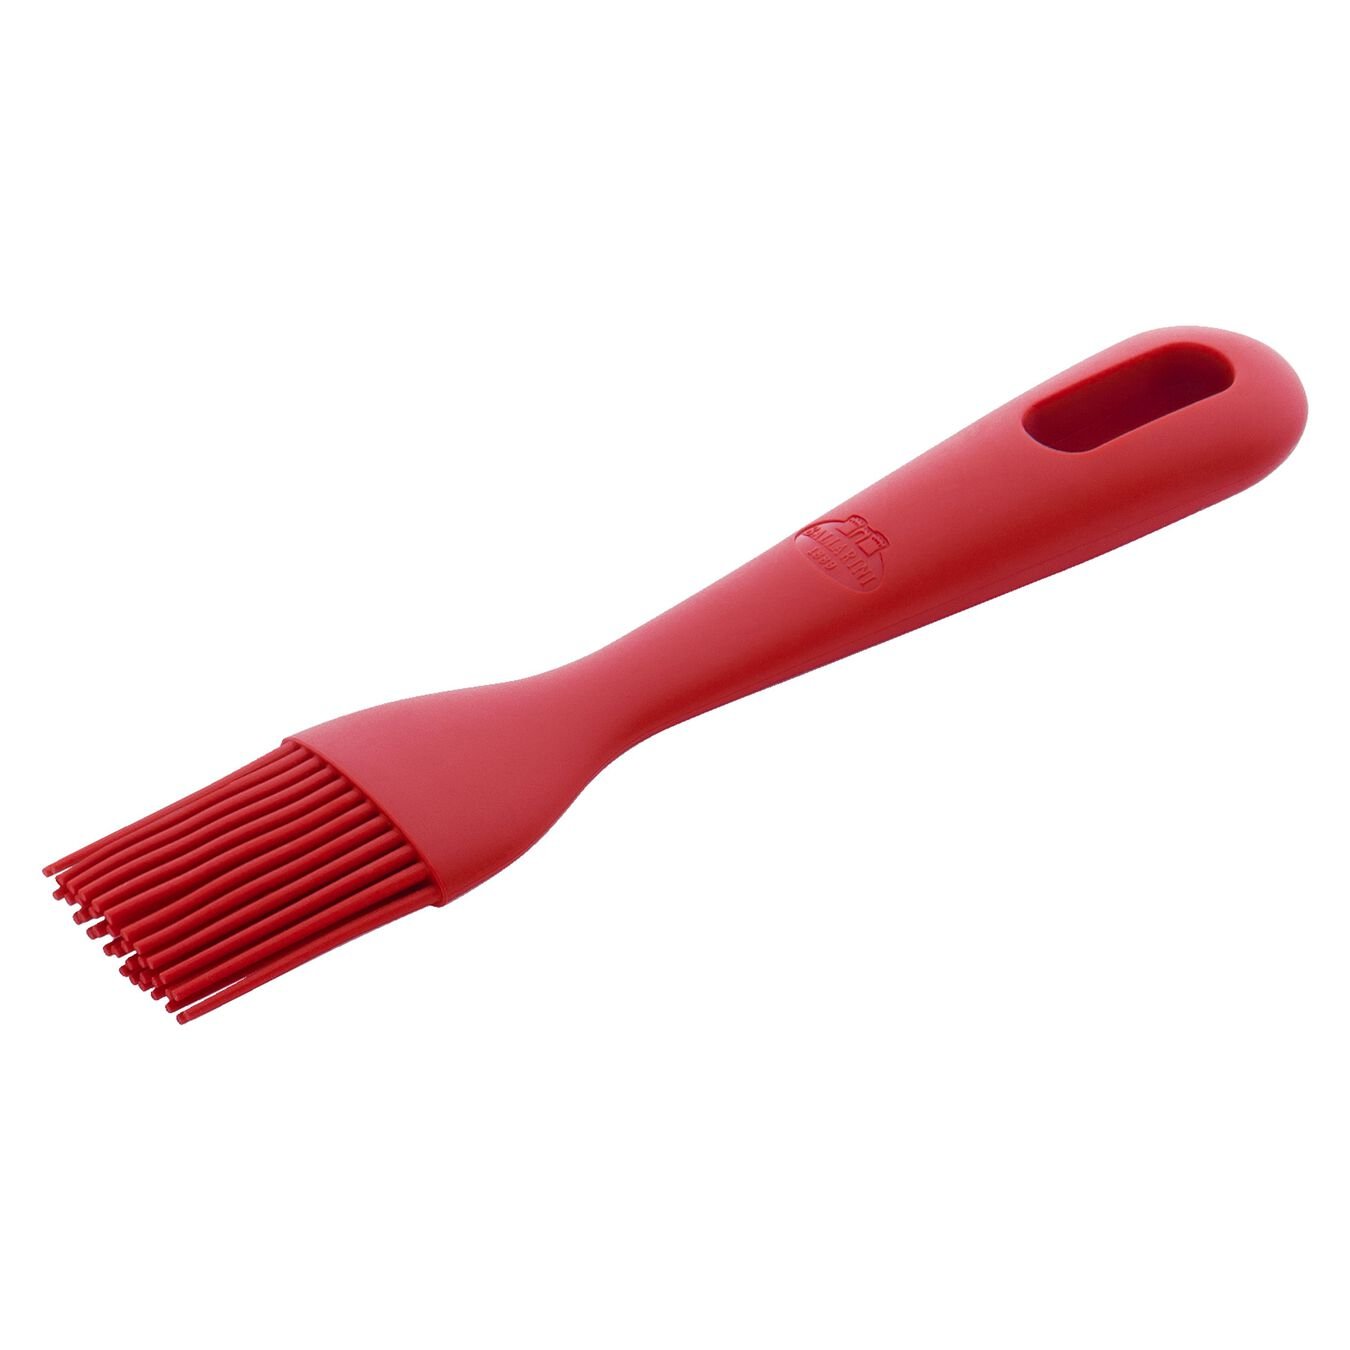 17 cm Silicone Pastry brush,,large 1